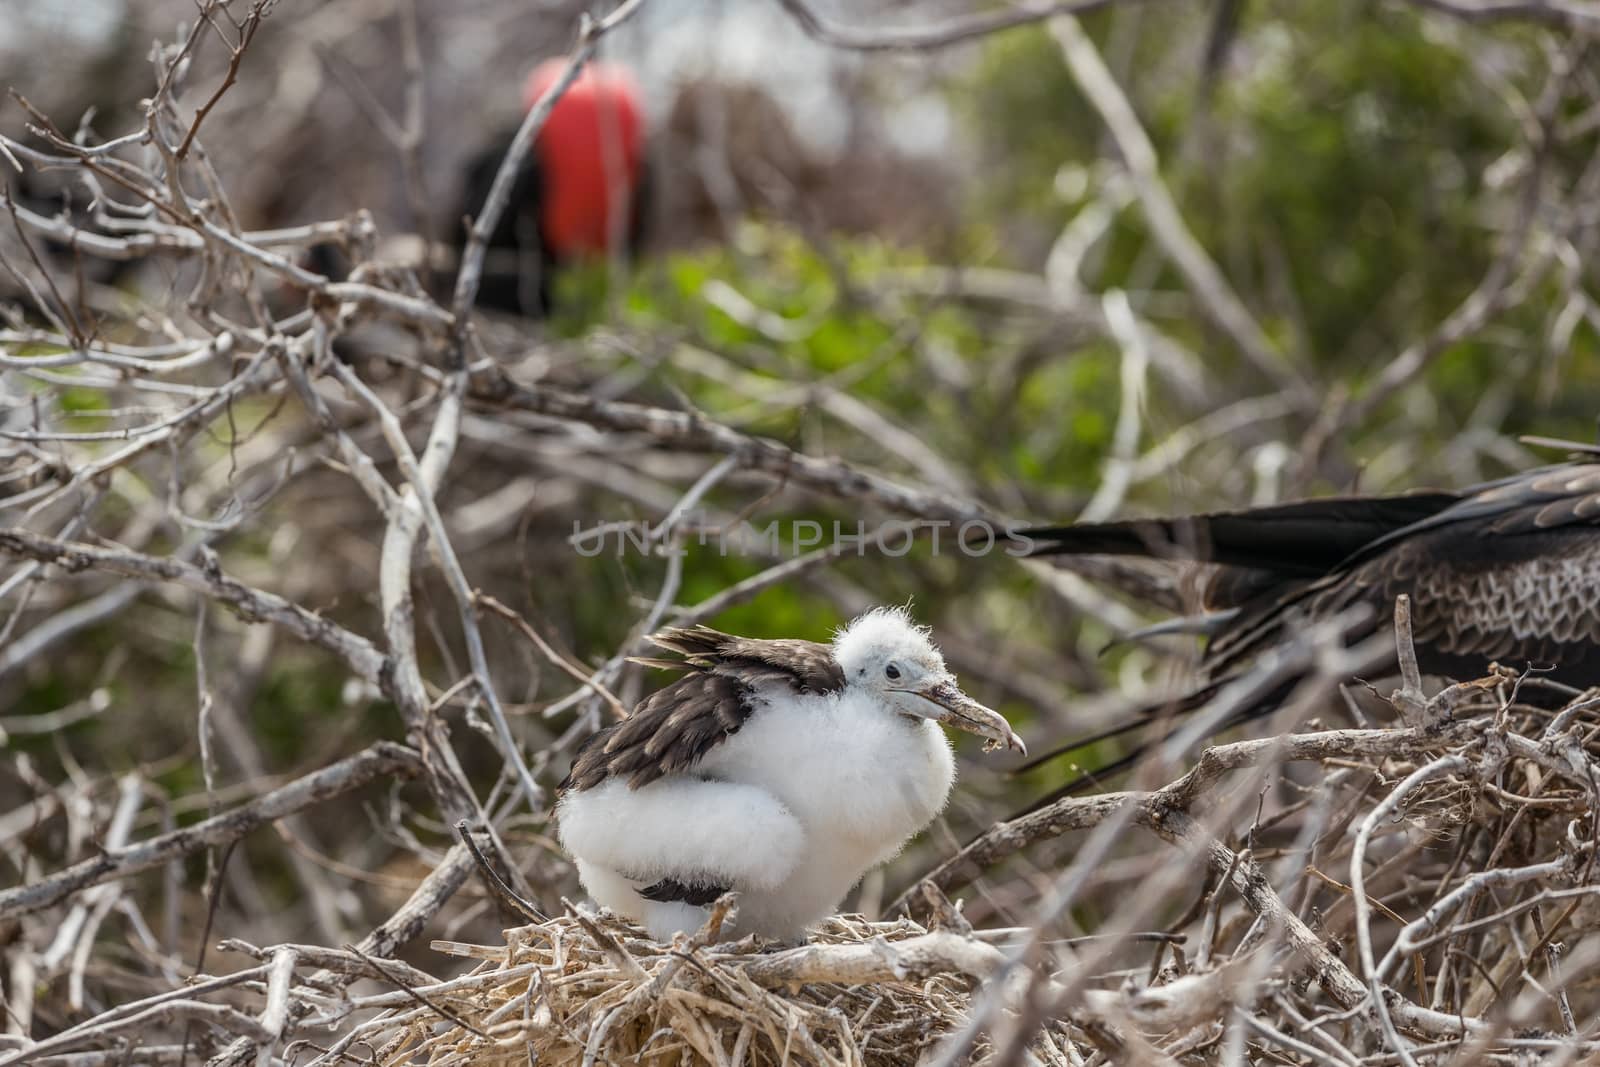 Frigatebird on Galapagos islands. Juvenile Magnificent Frigate-bird chick in birds nest, North Seymour Island, Galapagos Islands. Male frigate bird with inflated red neck gular pouch in background